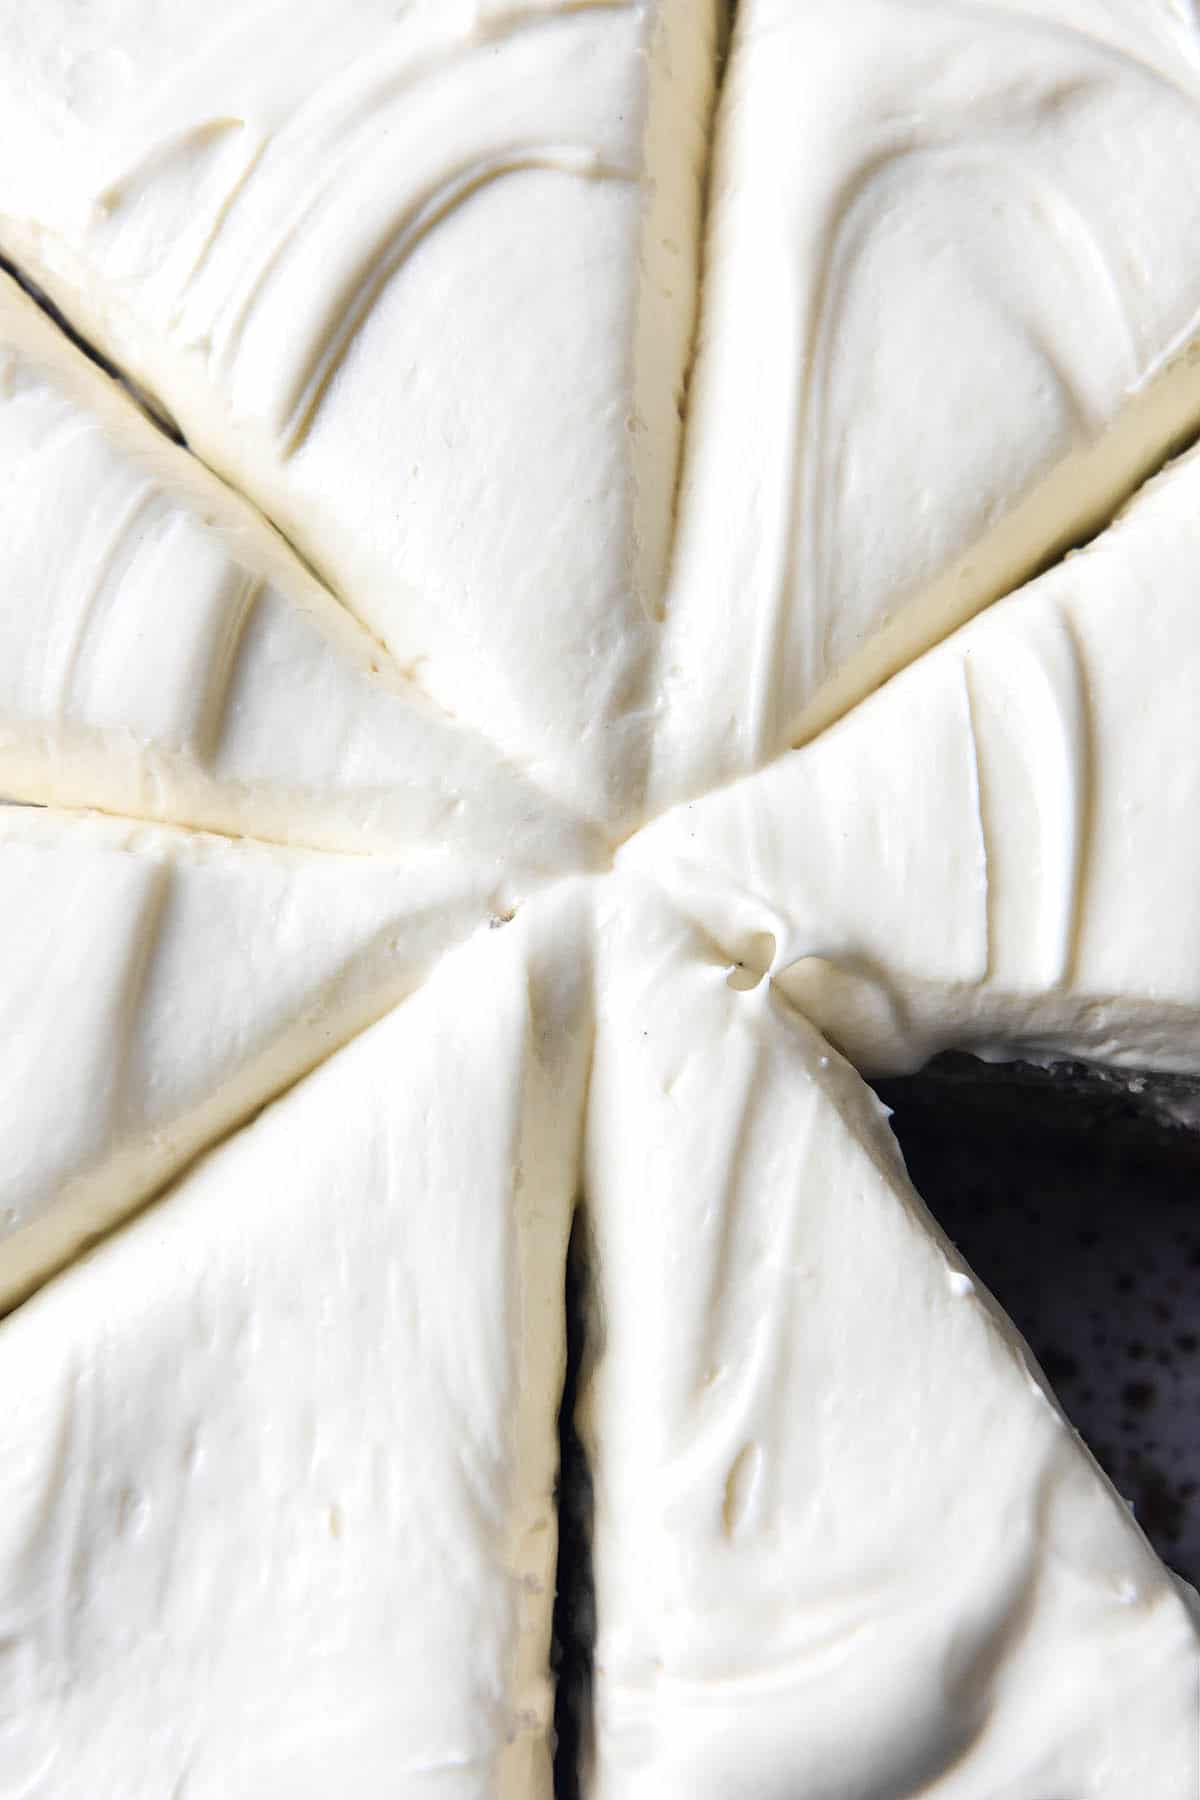 A close up macro image of a gluten free banana cake topped with fluffy cream cheese icing. The cake has been cut into 8, making a slice pattern through the top of the white icing. The bottom right slice of cake has been removed, revealing a speckled ceramic plate underneath. 